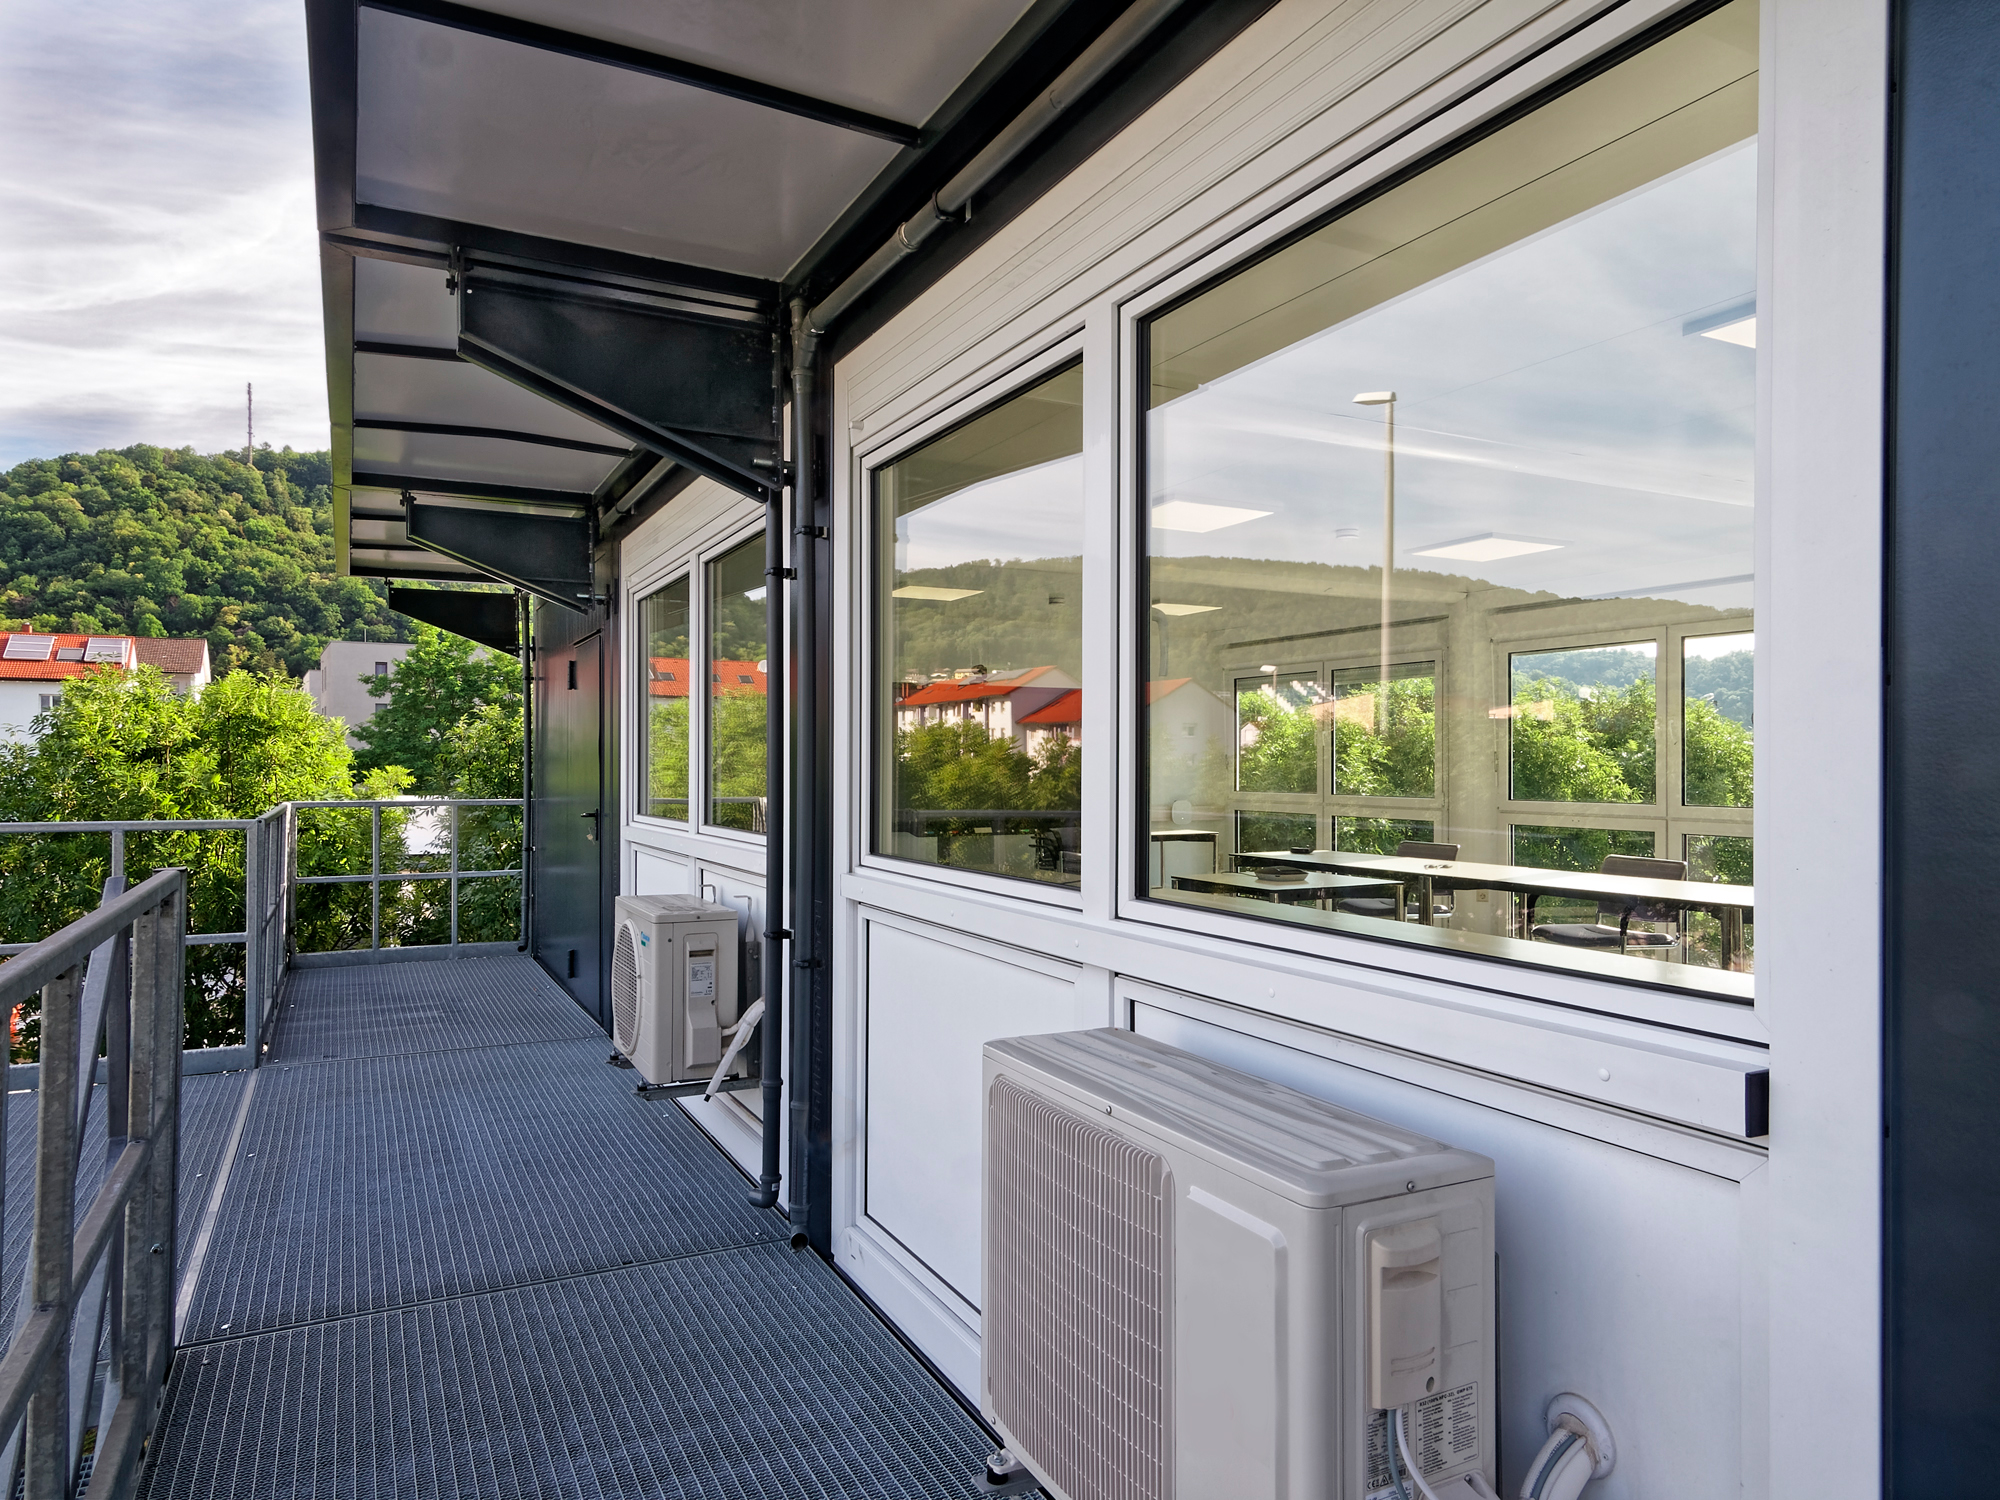 Insulating glazing, roller shutters and split air conditioning units ensure a pleasant indoor climate.